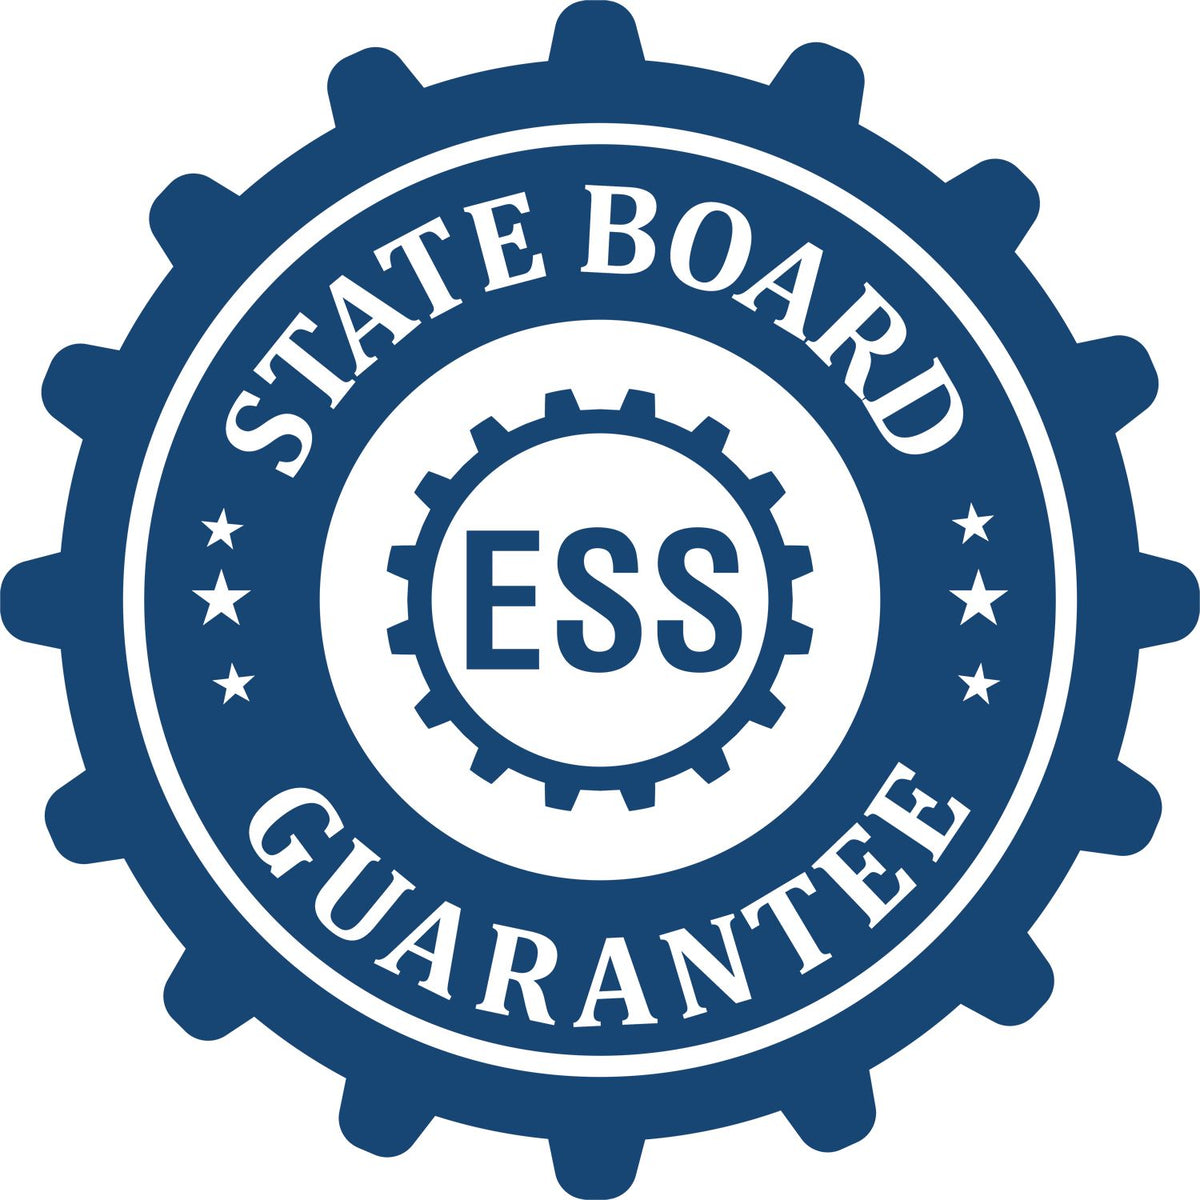 An emblem in a gear shape illustrating a state board guarantee for the Gift North Carolina Landscape Architect Seal